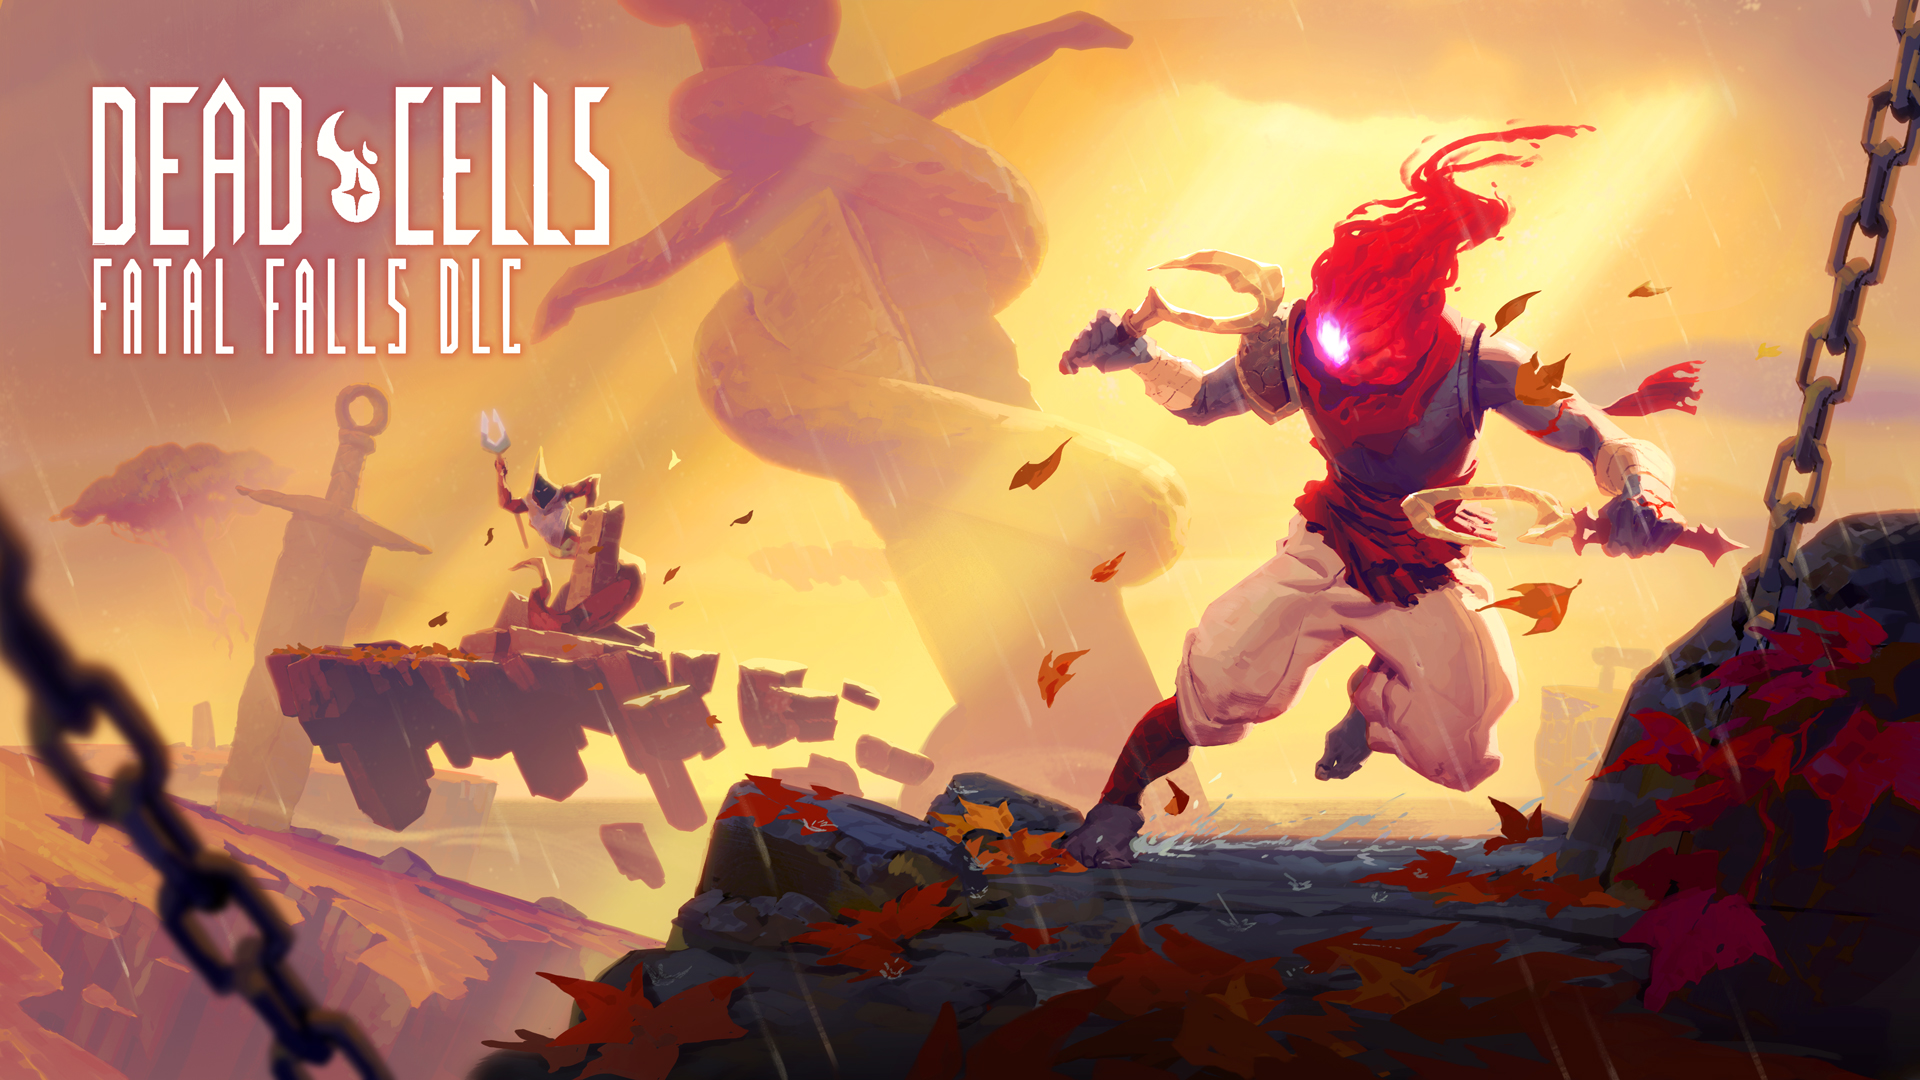 Git gud art. Featured in the heart of dead cells book : r/deadcells